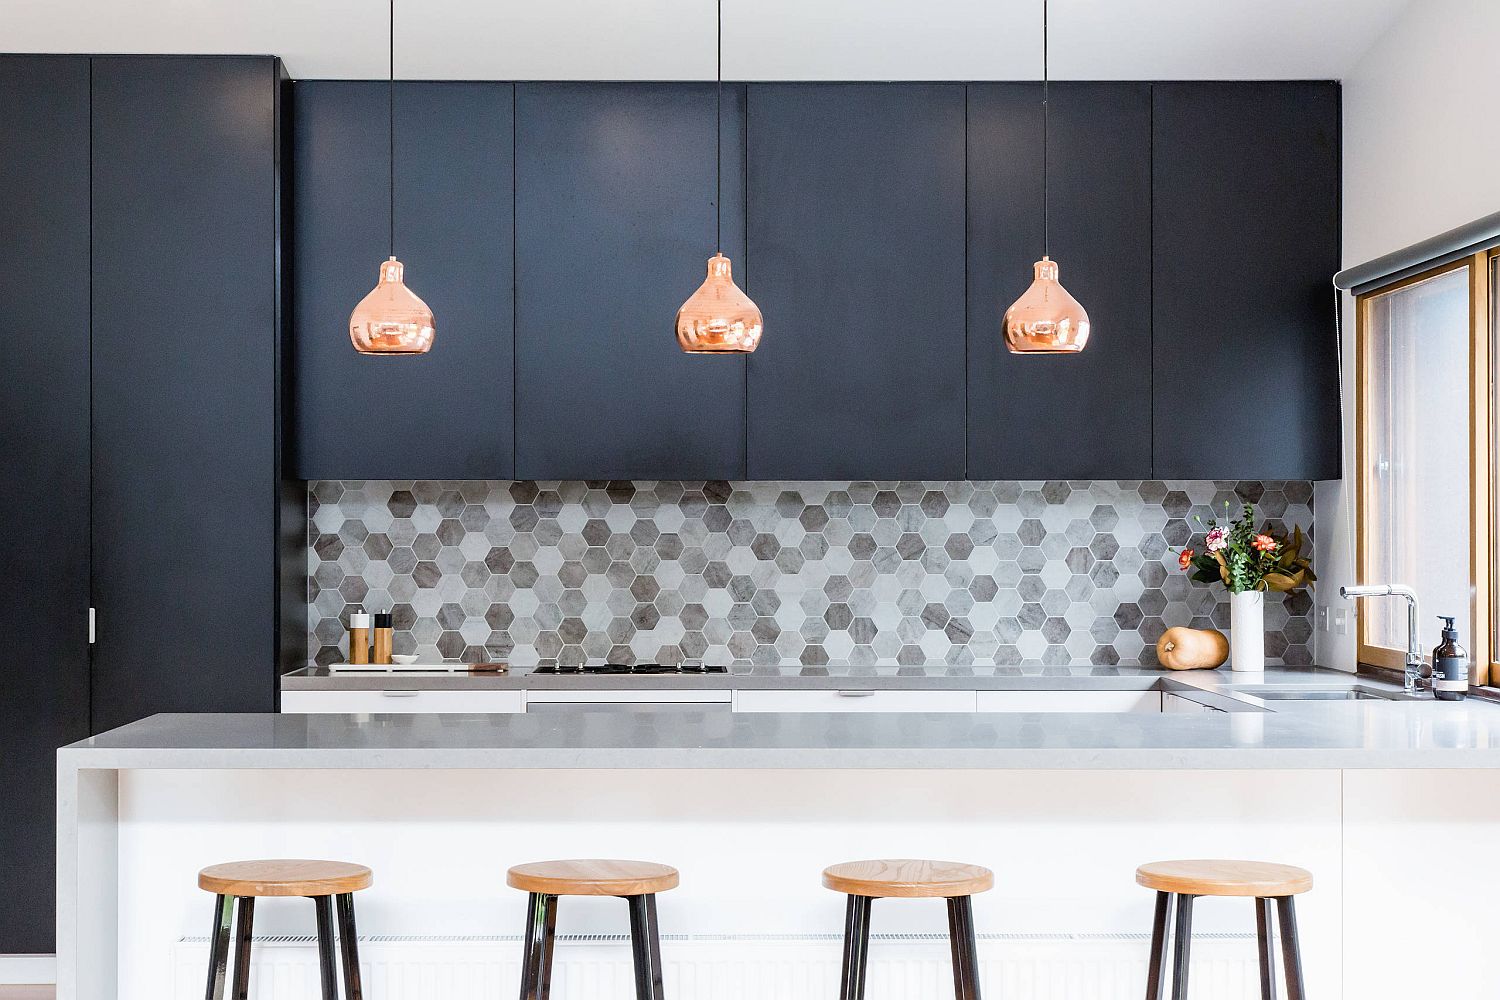 Gray hexagonal tiled kitchen backsplash is a popular choice you cannot go wrong with